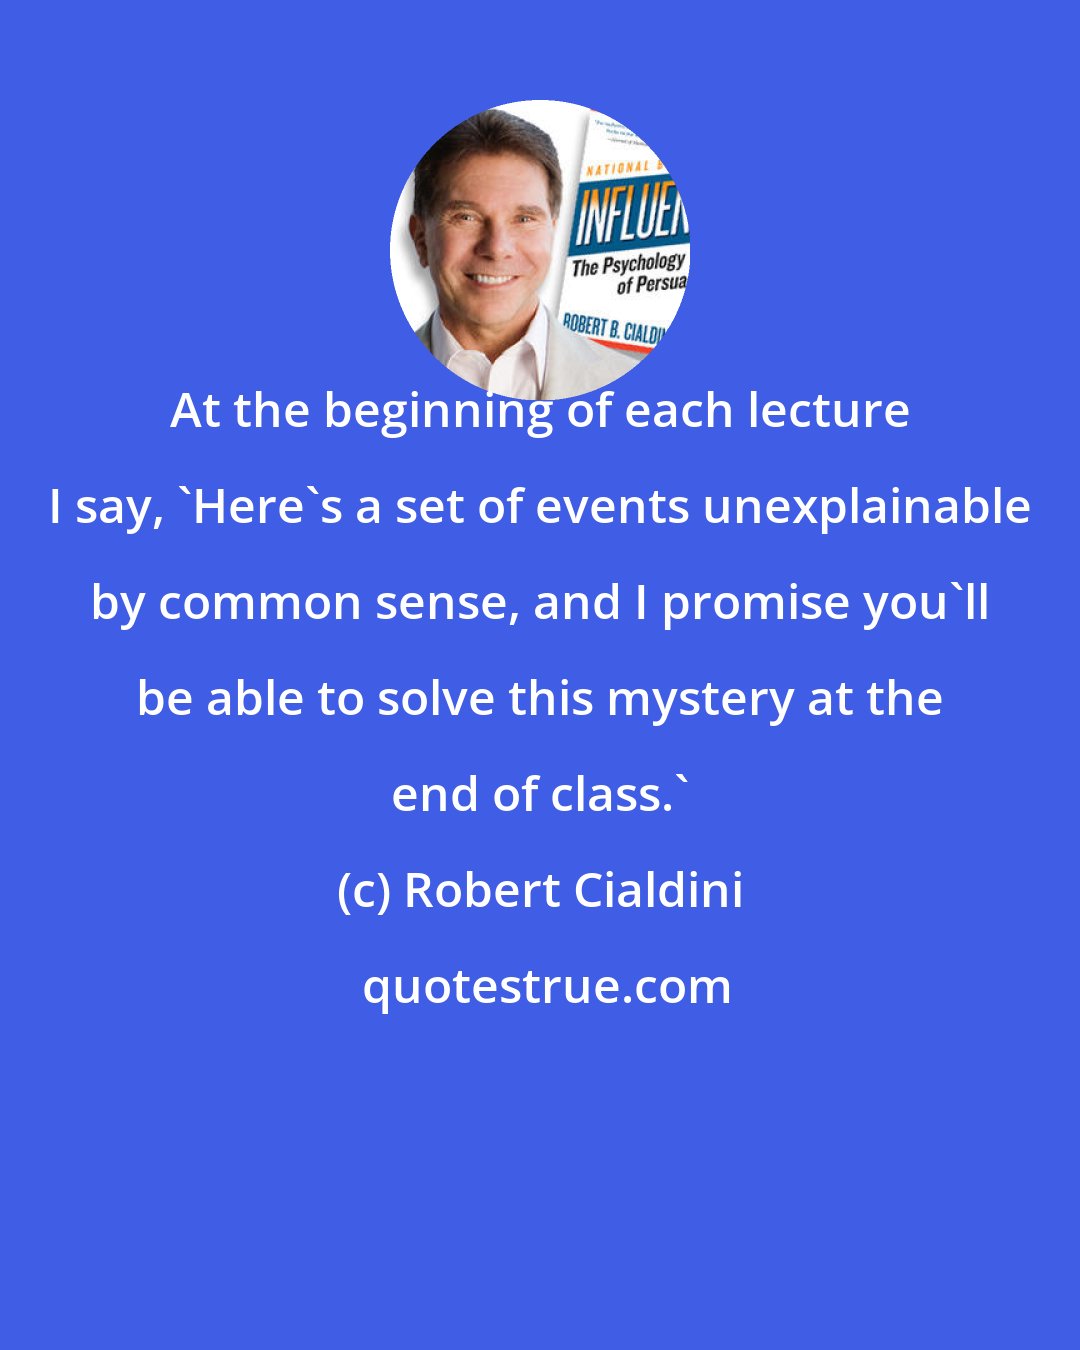 Robert Cialdini: At the beginning of each lecture I say, 'Here's a set of events unexplainable by common sense, and I promise you'll be able to solve this mystery at the end of class.'